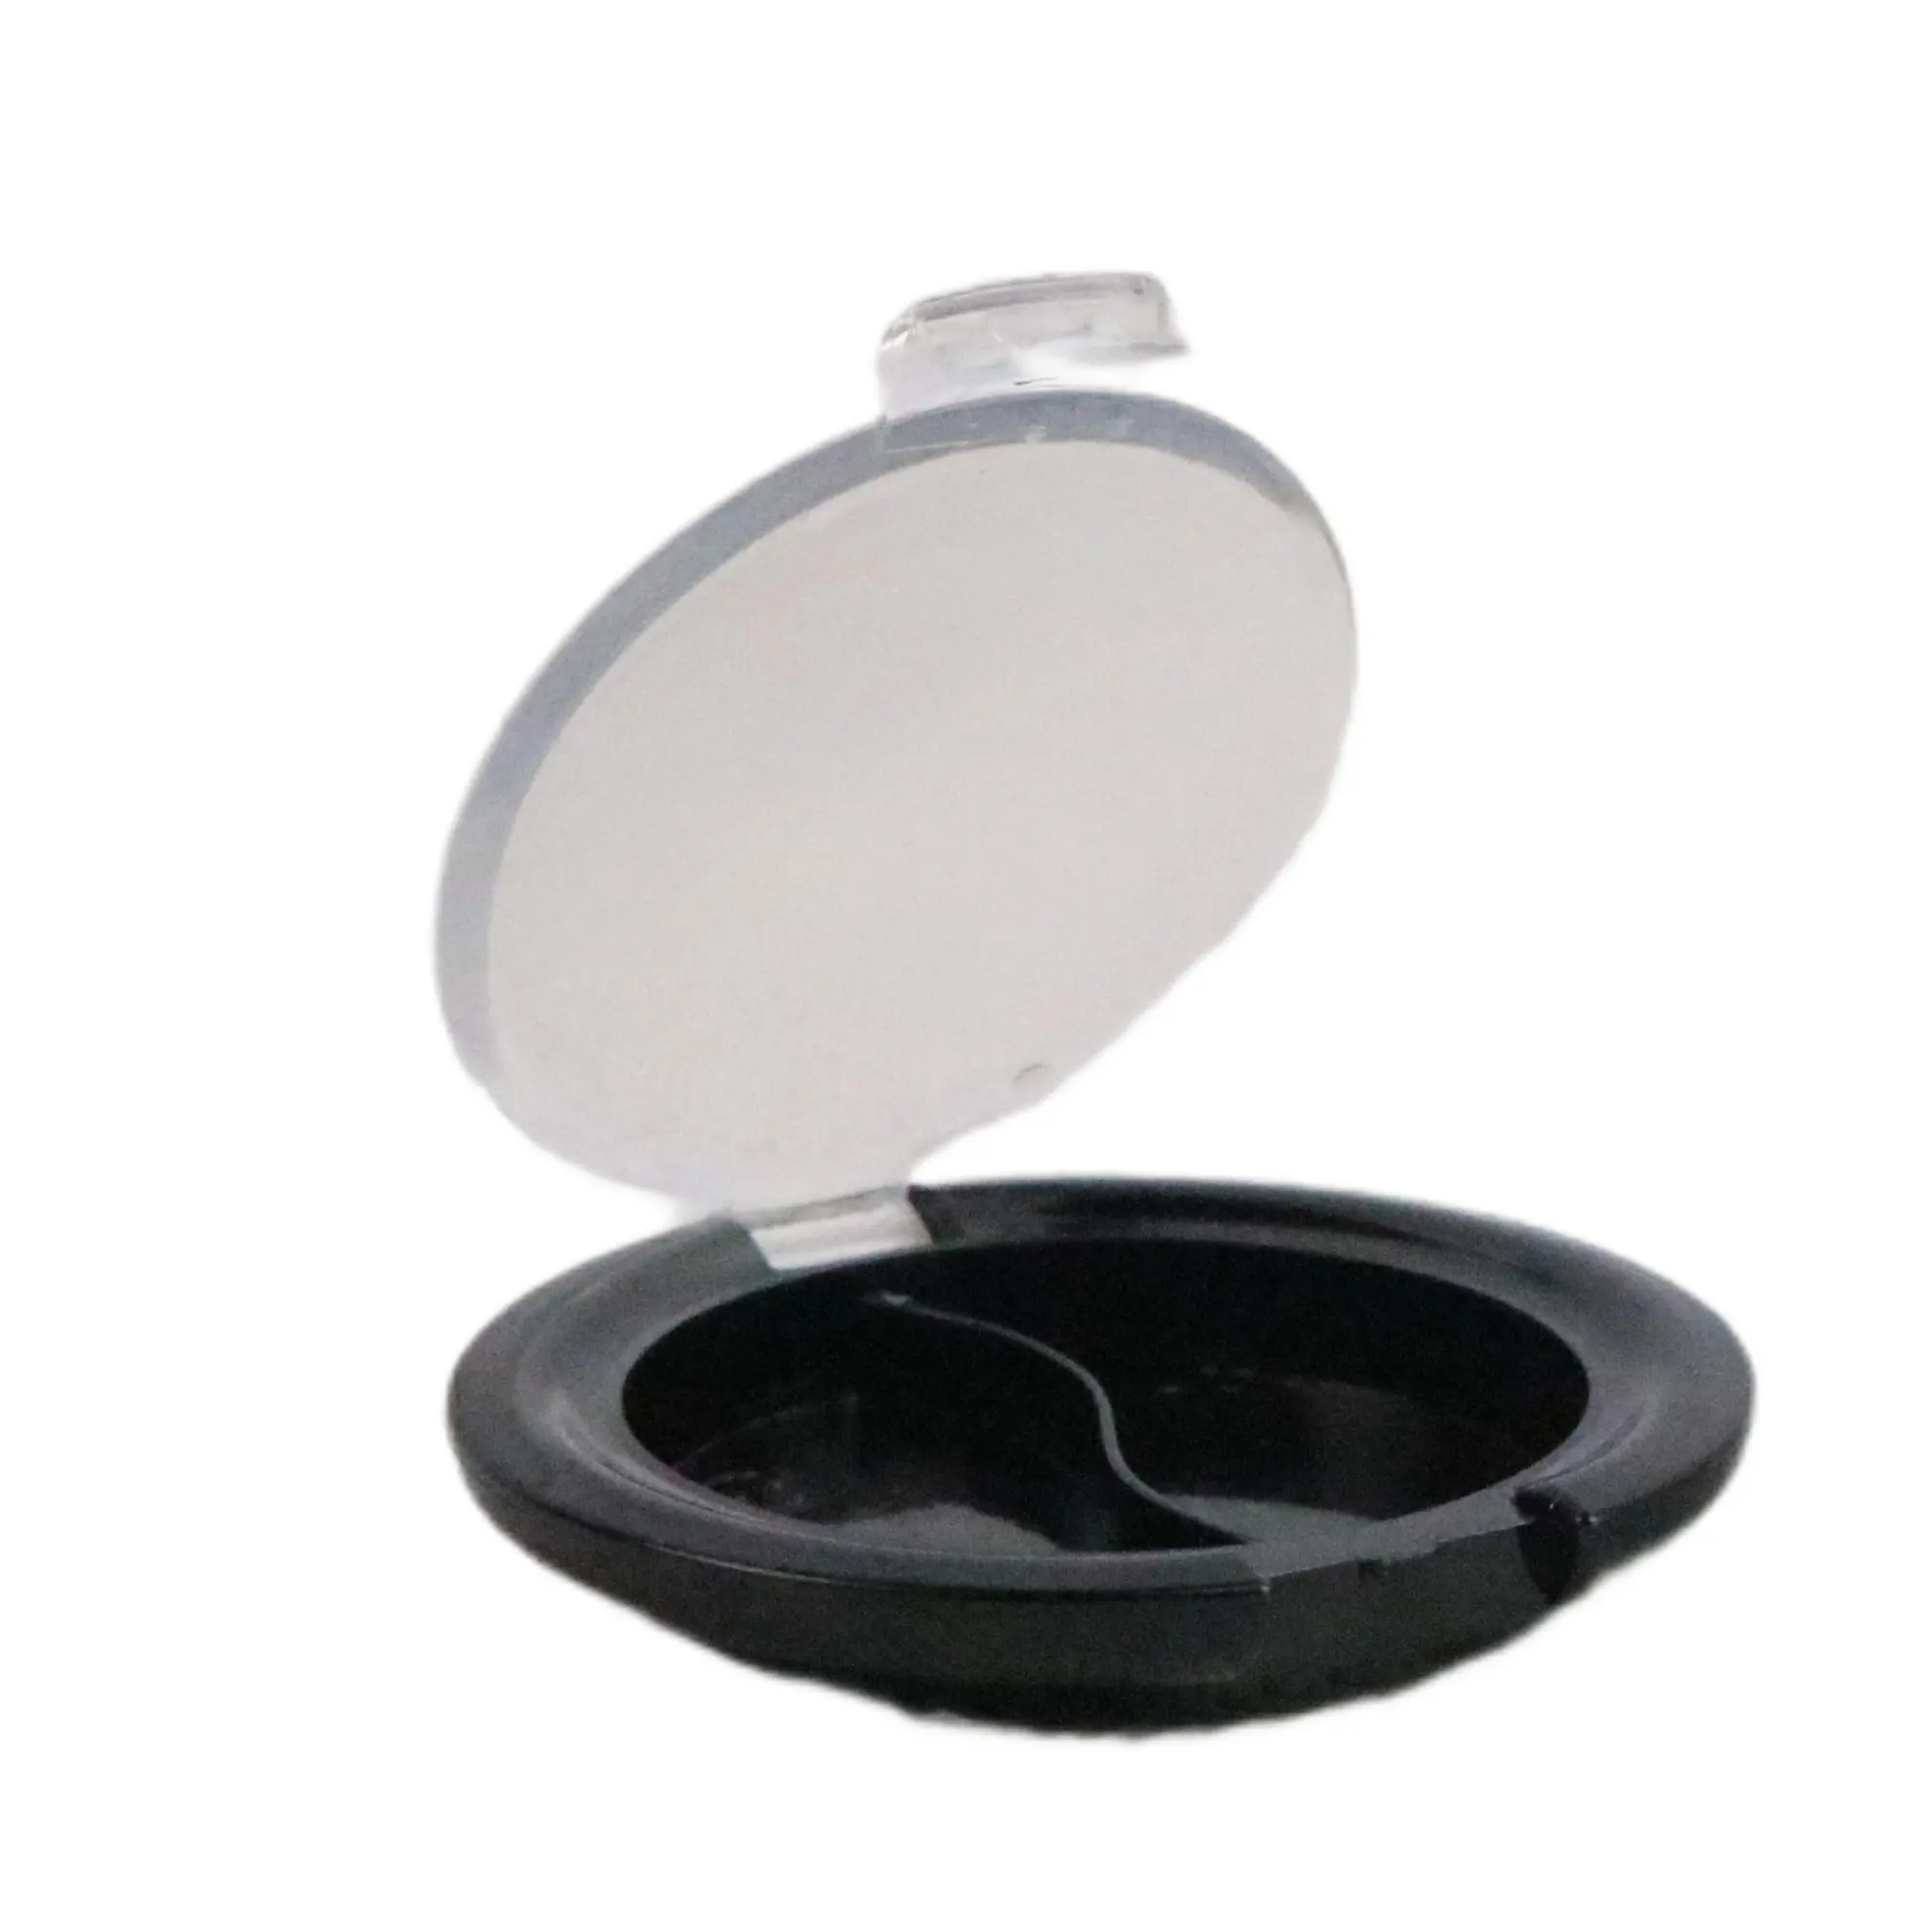 Compact Container Cosmetic Make up Pressed Powder Case BLACK Cosmetic Packaging Powder Box Accept Best Price Wholesale Plastic